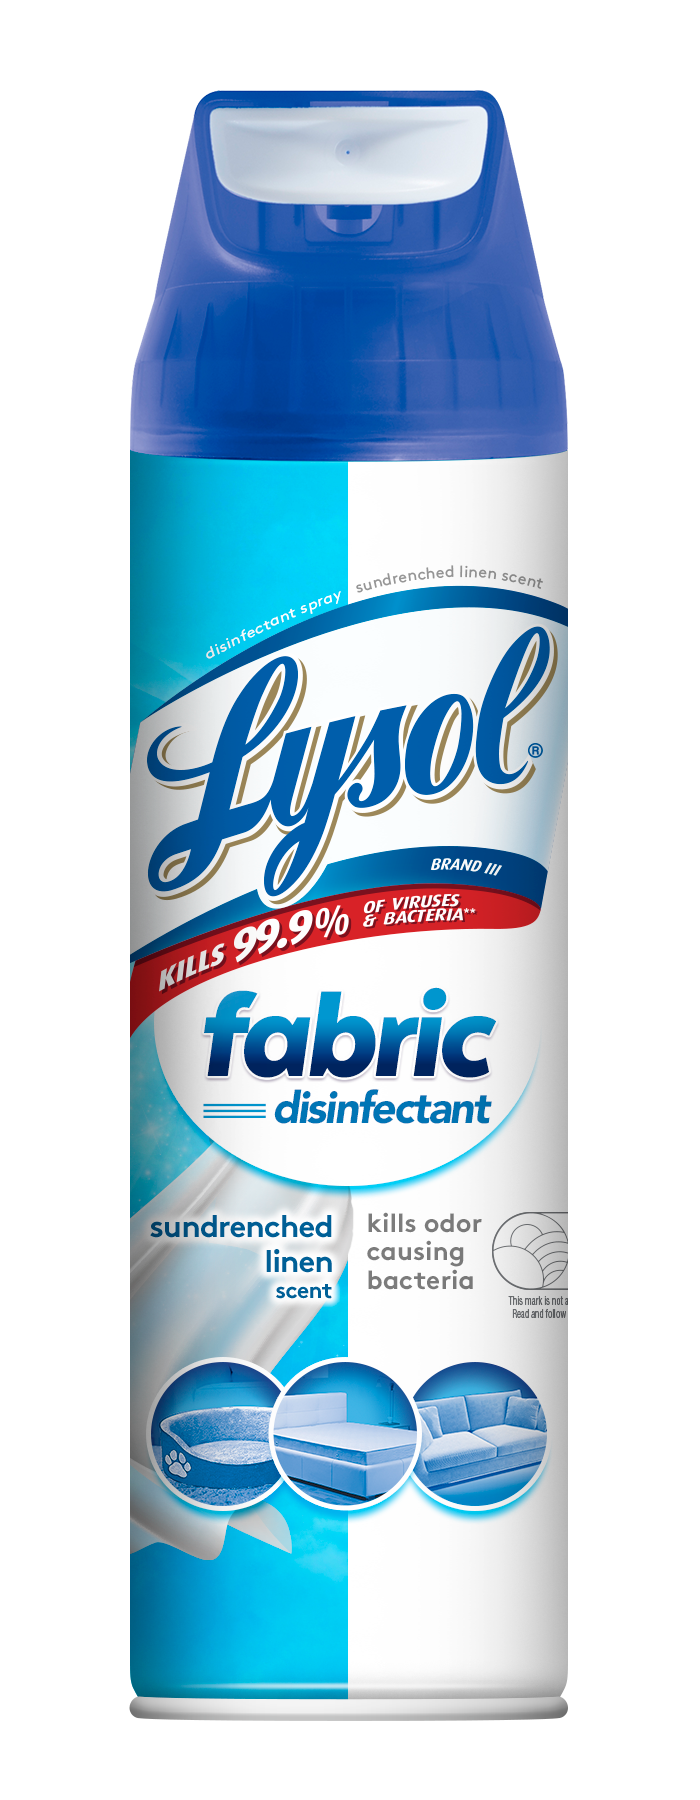 LYSOL Fabric Disinfectant  Sundrenched Linen